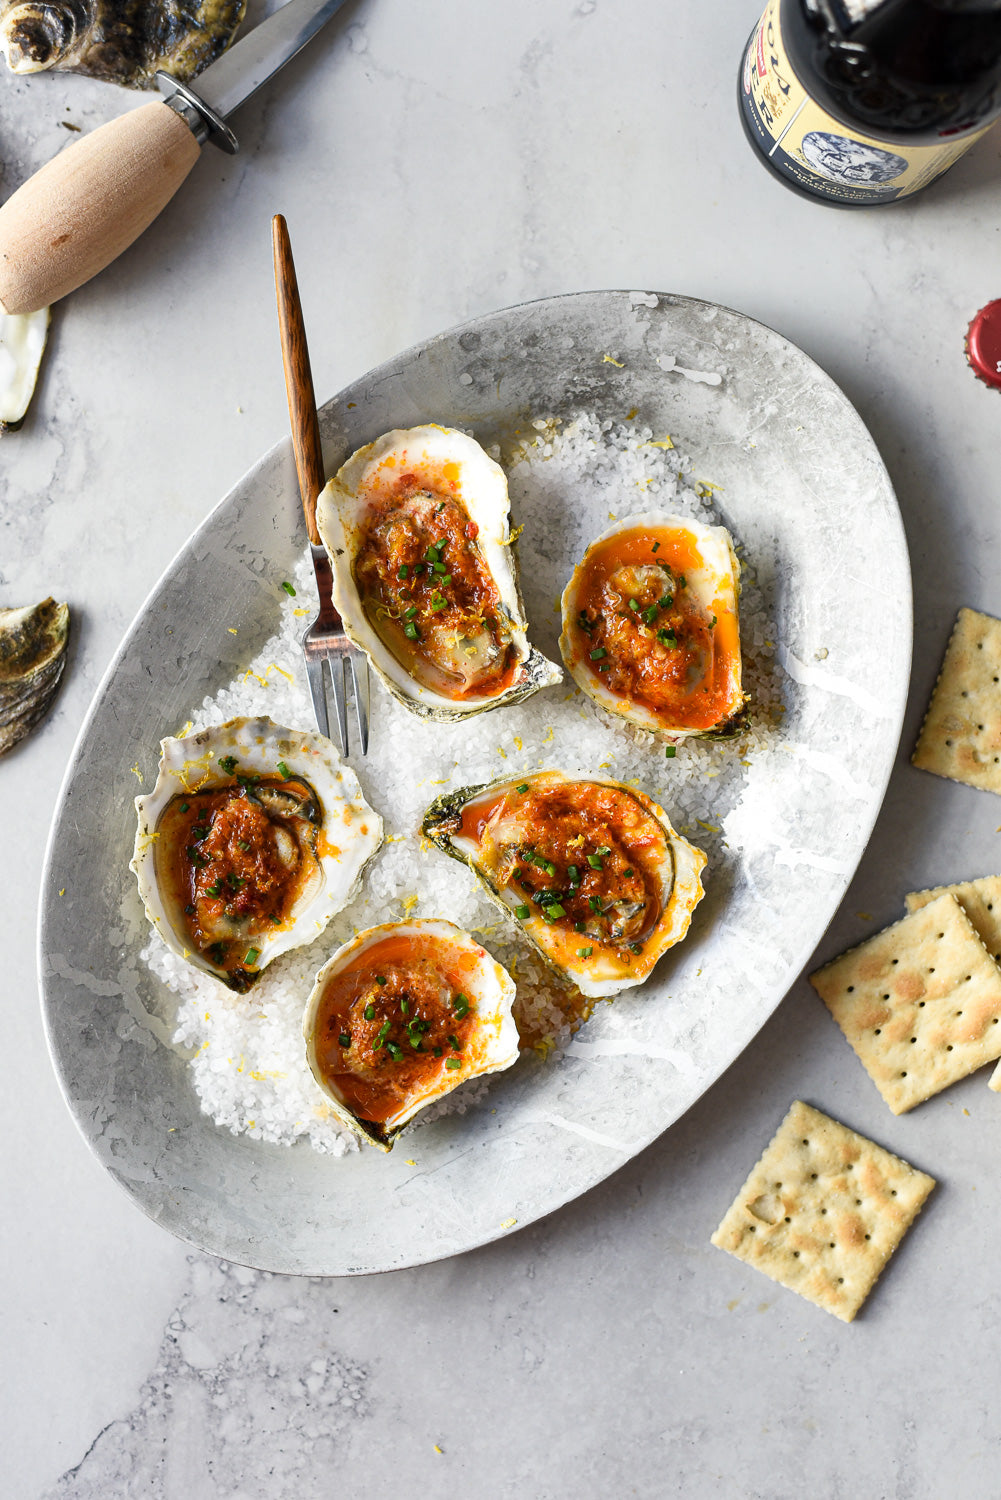 Recipe: Roasted Oysters with Calabrian Chile Butter